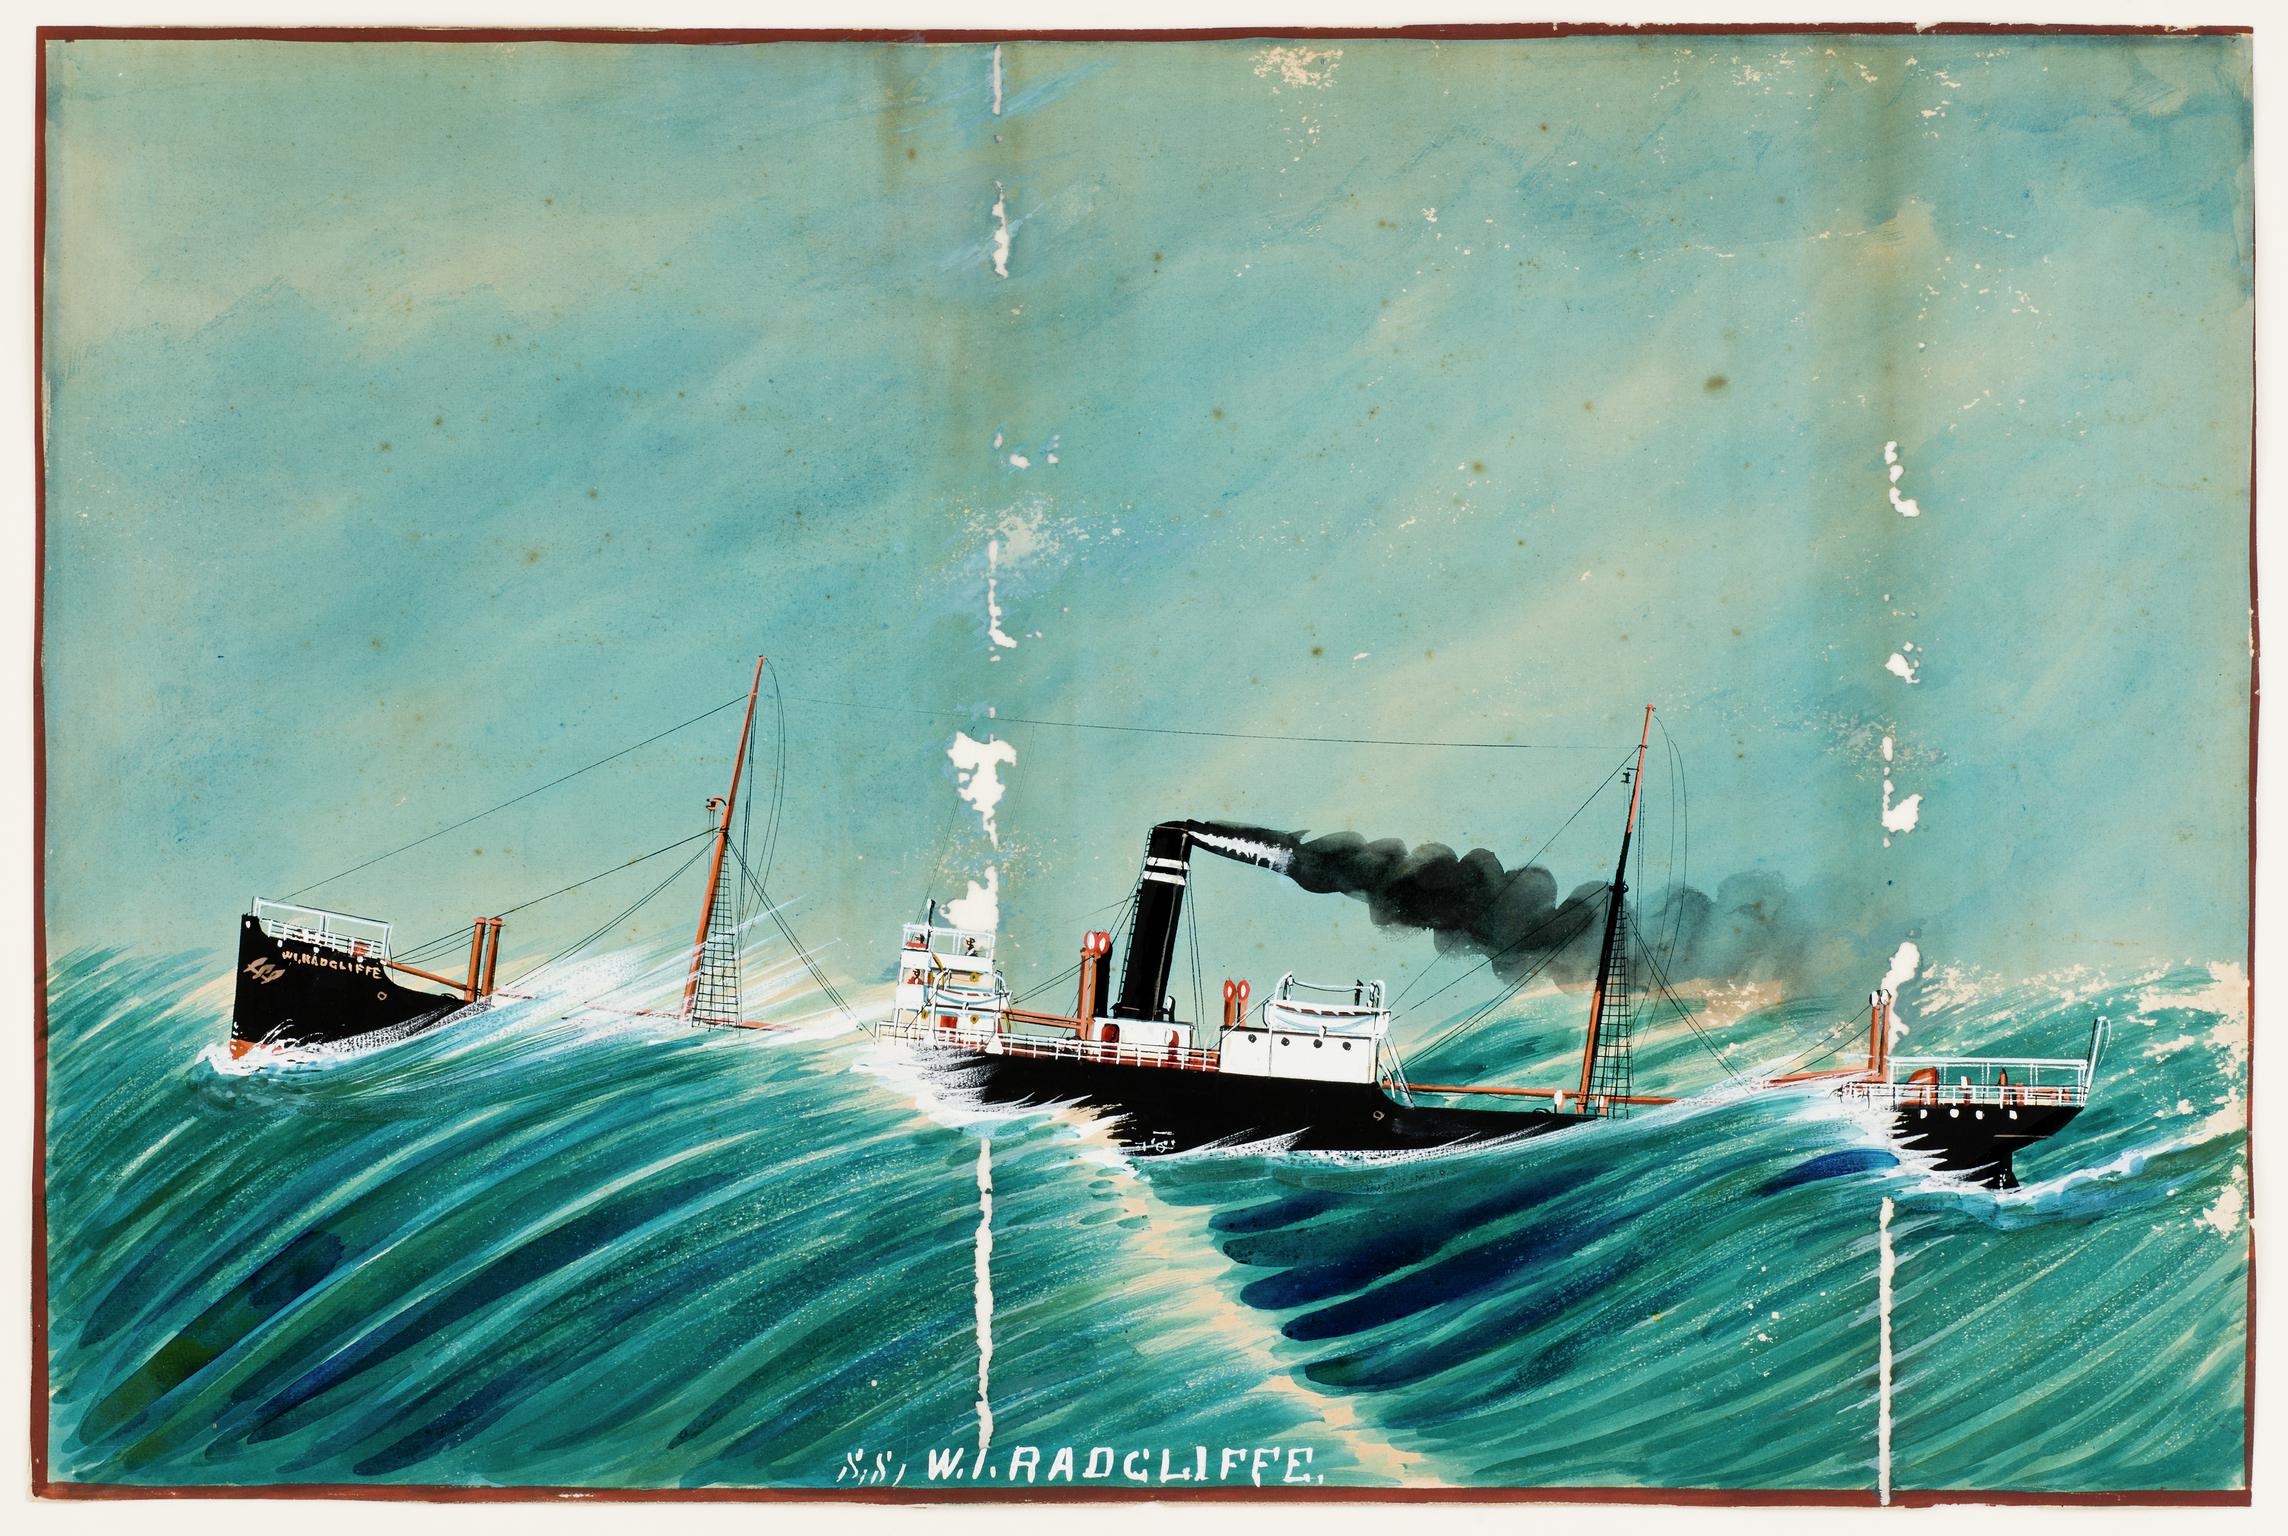 S.S. W.I. RADCLIFFE (painting)